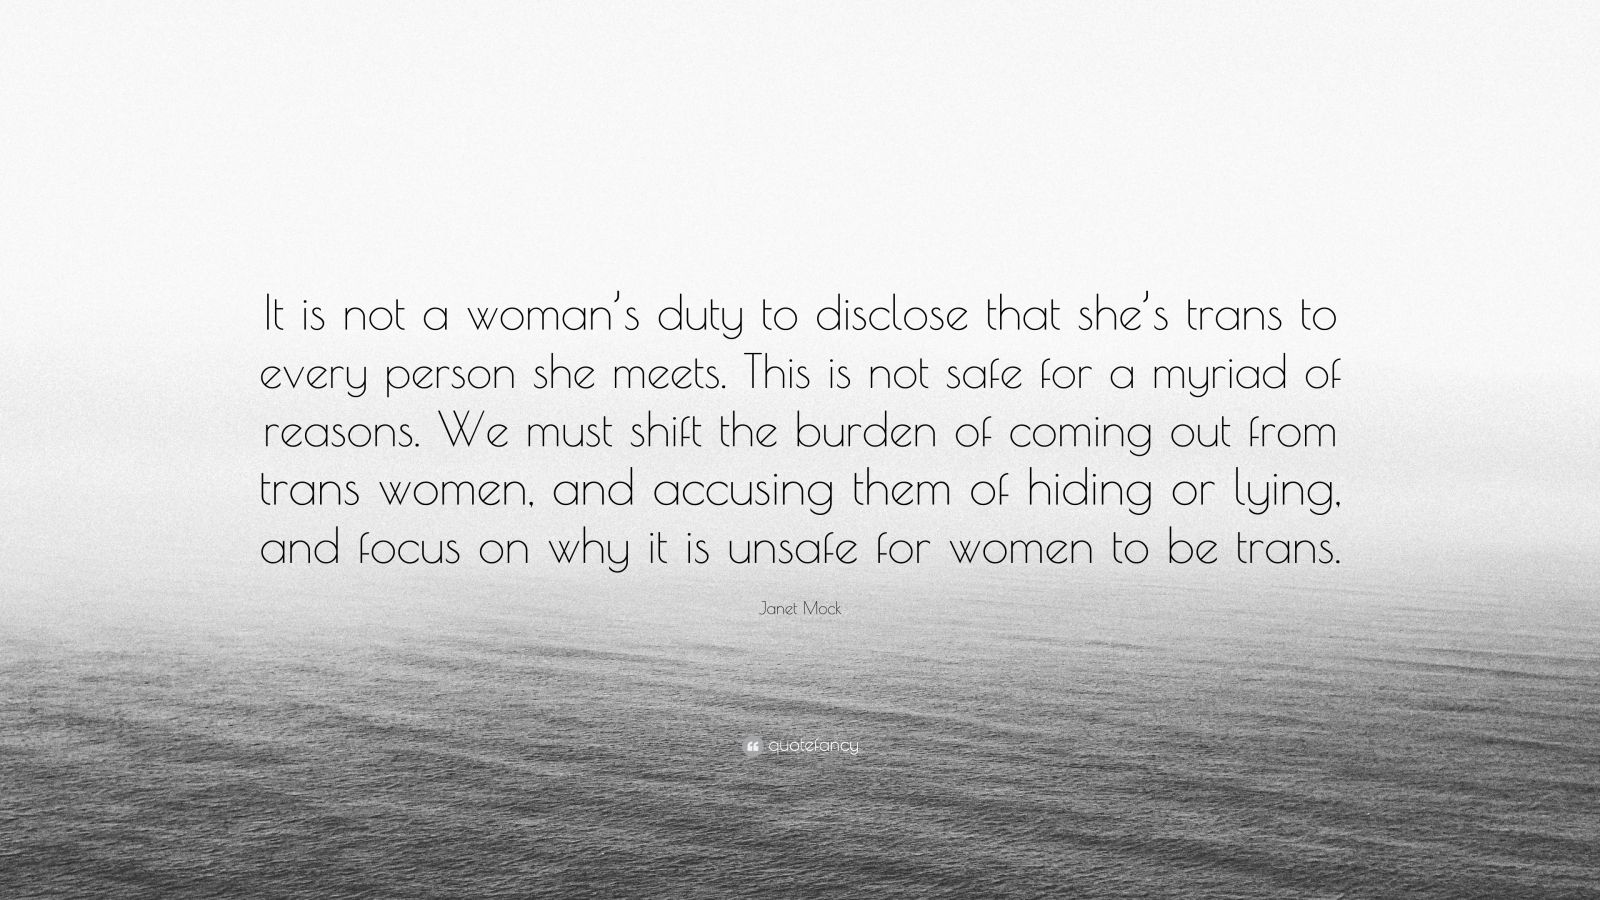 Janet Mock Quote: "It is not a woman's duty to disclose ...